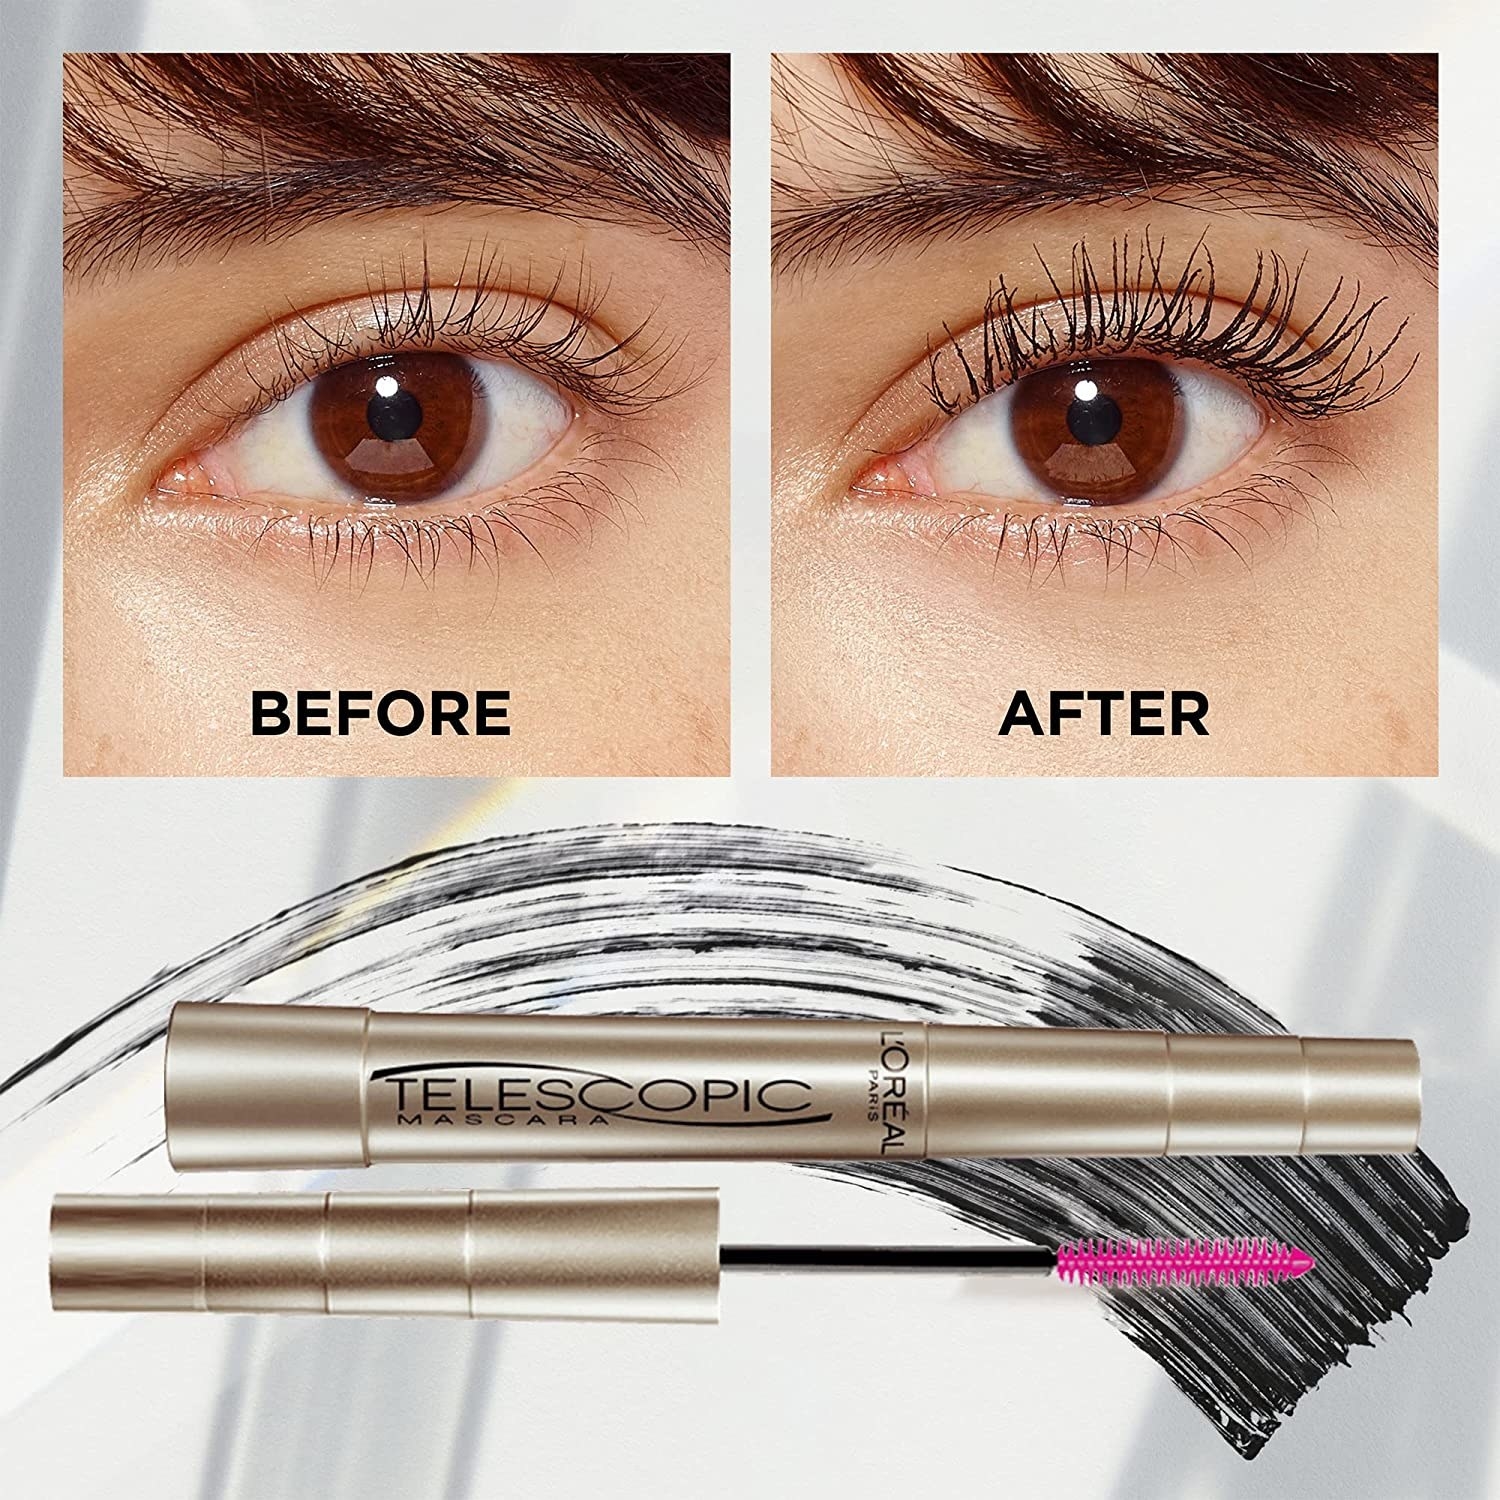 An eye before and after using the mascara on the lashes